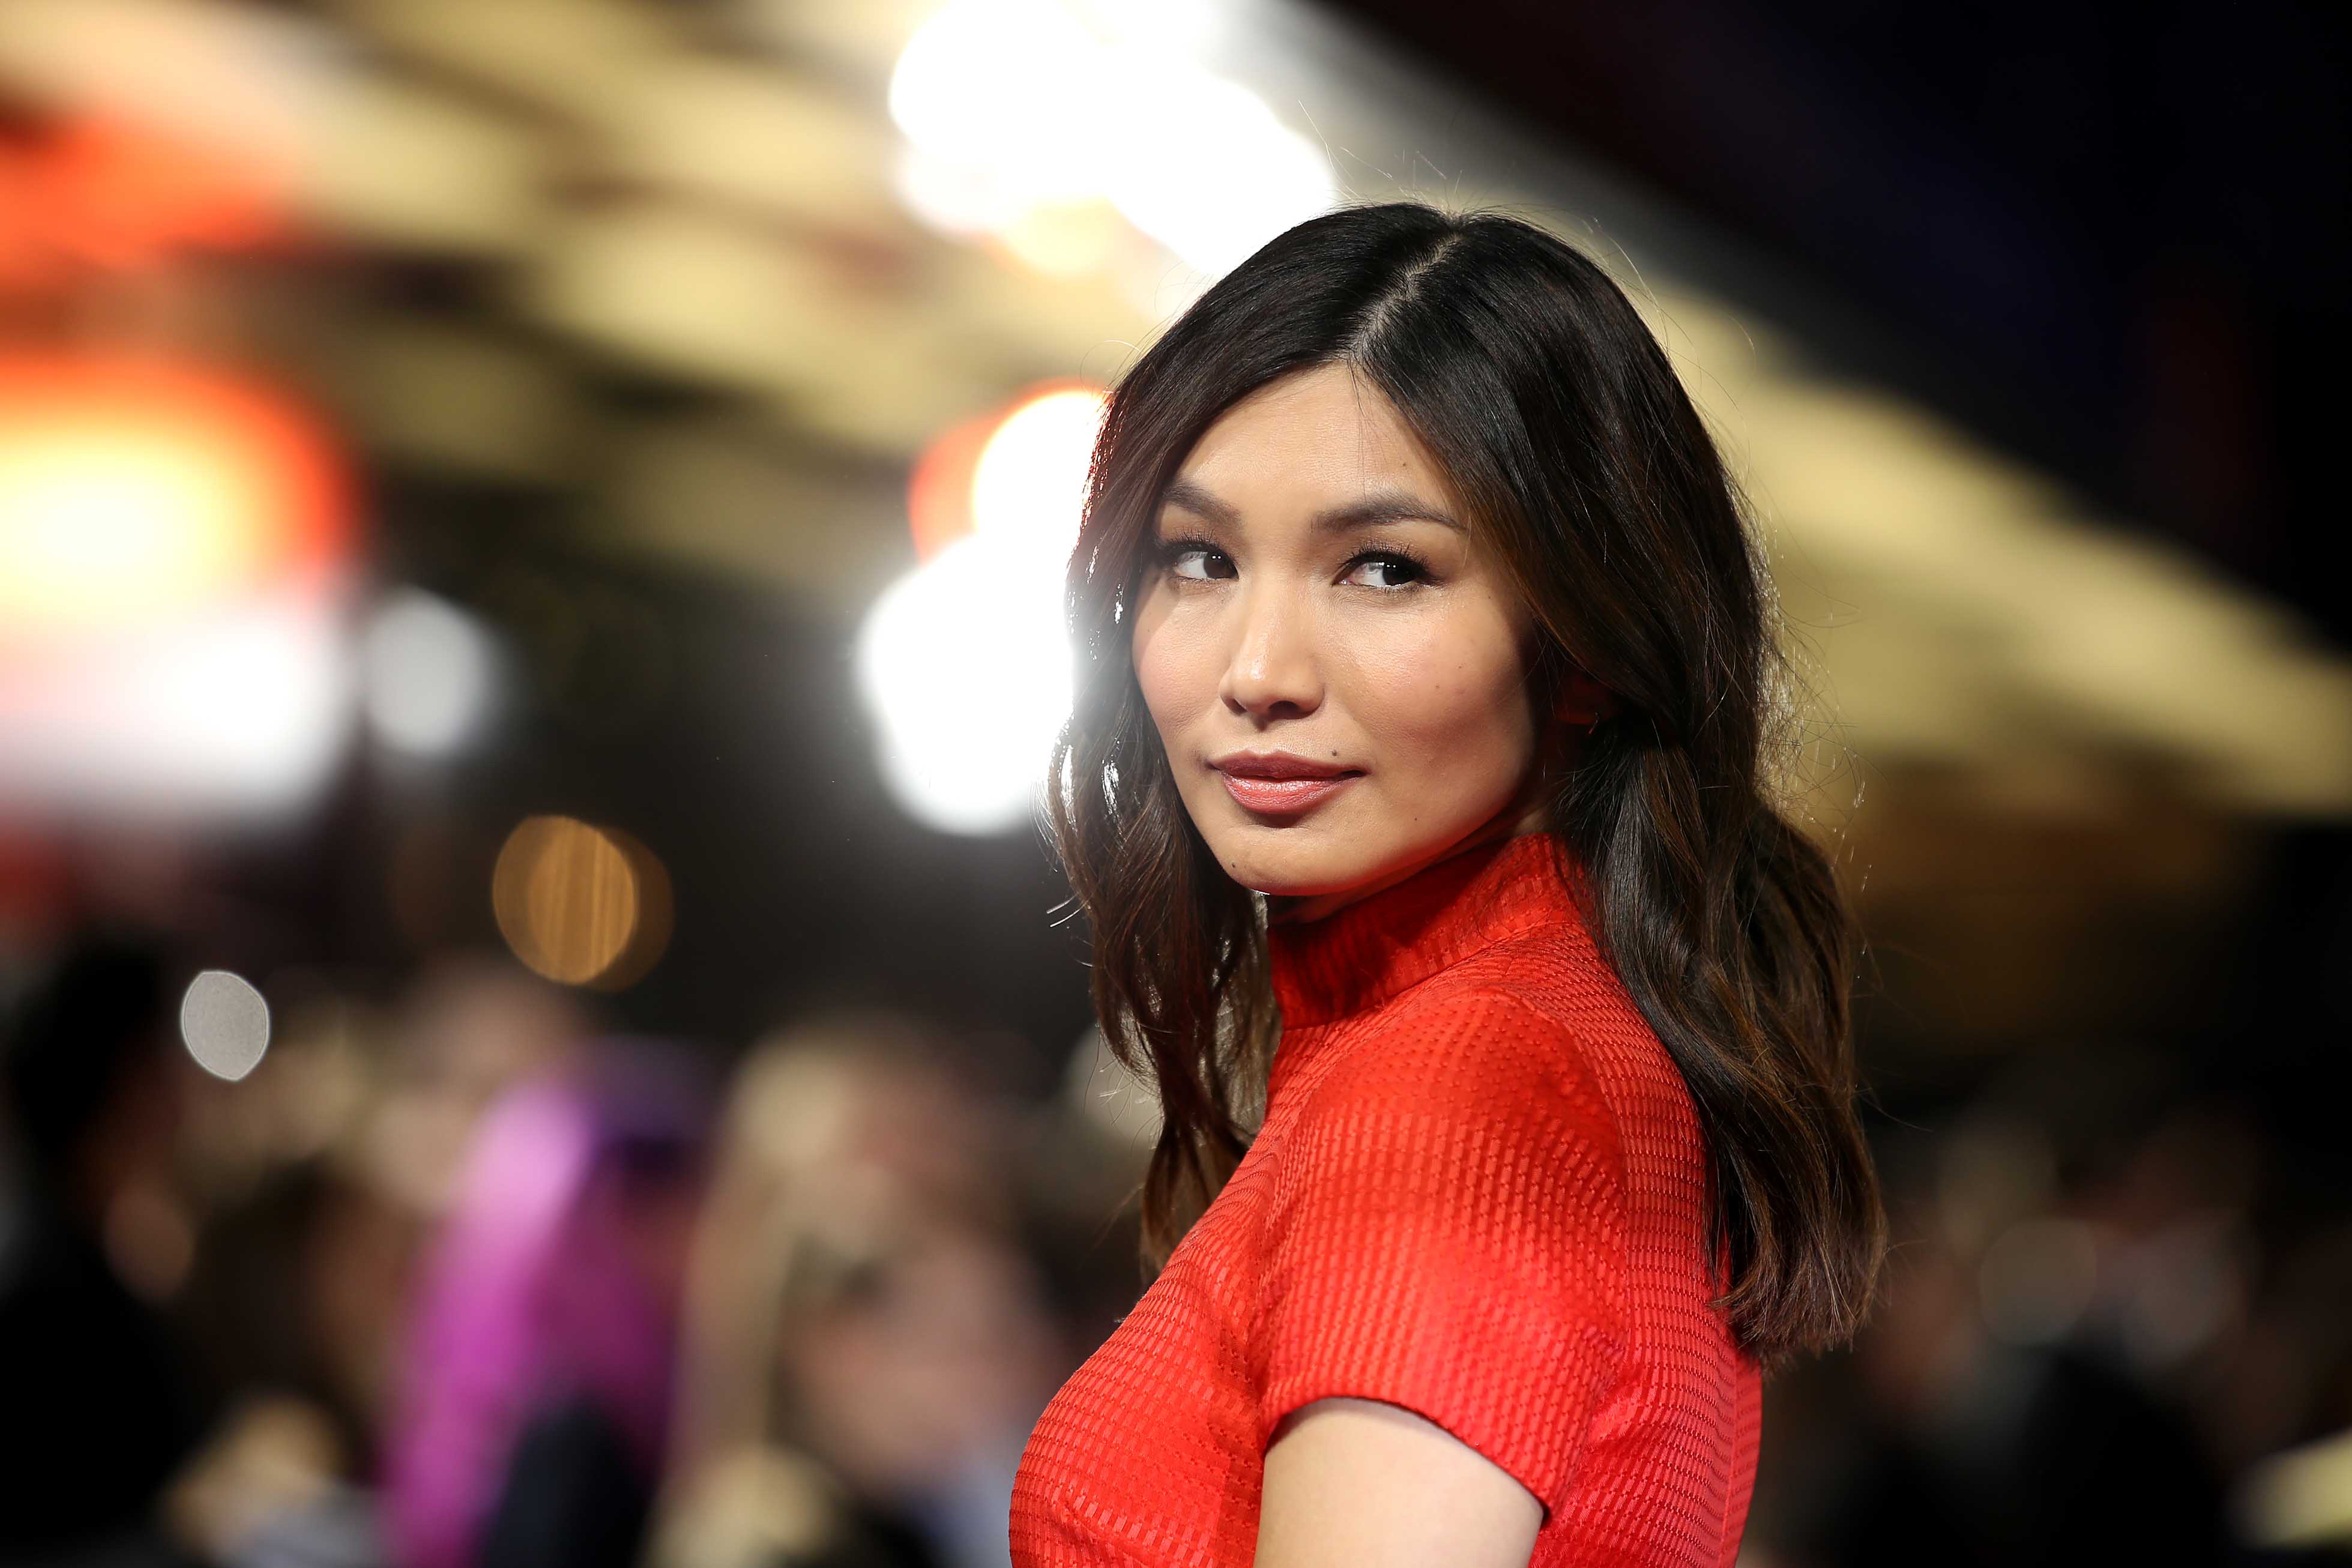 ‘Eternals’ star Gemma Chan from the chest up wearing a red top and looking over her left shoulder.
